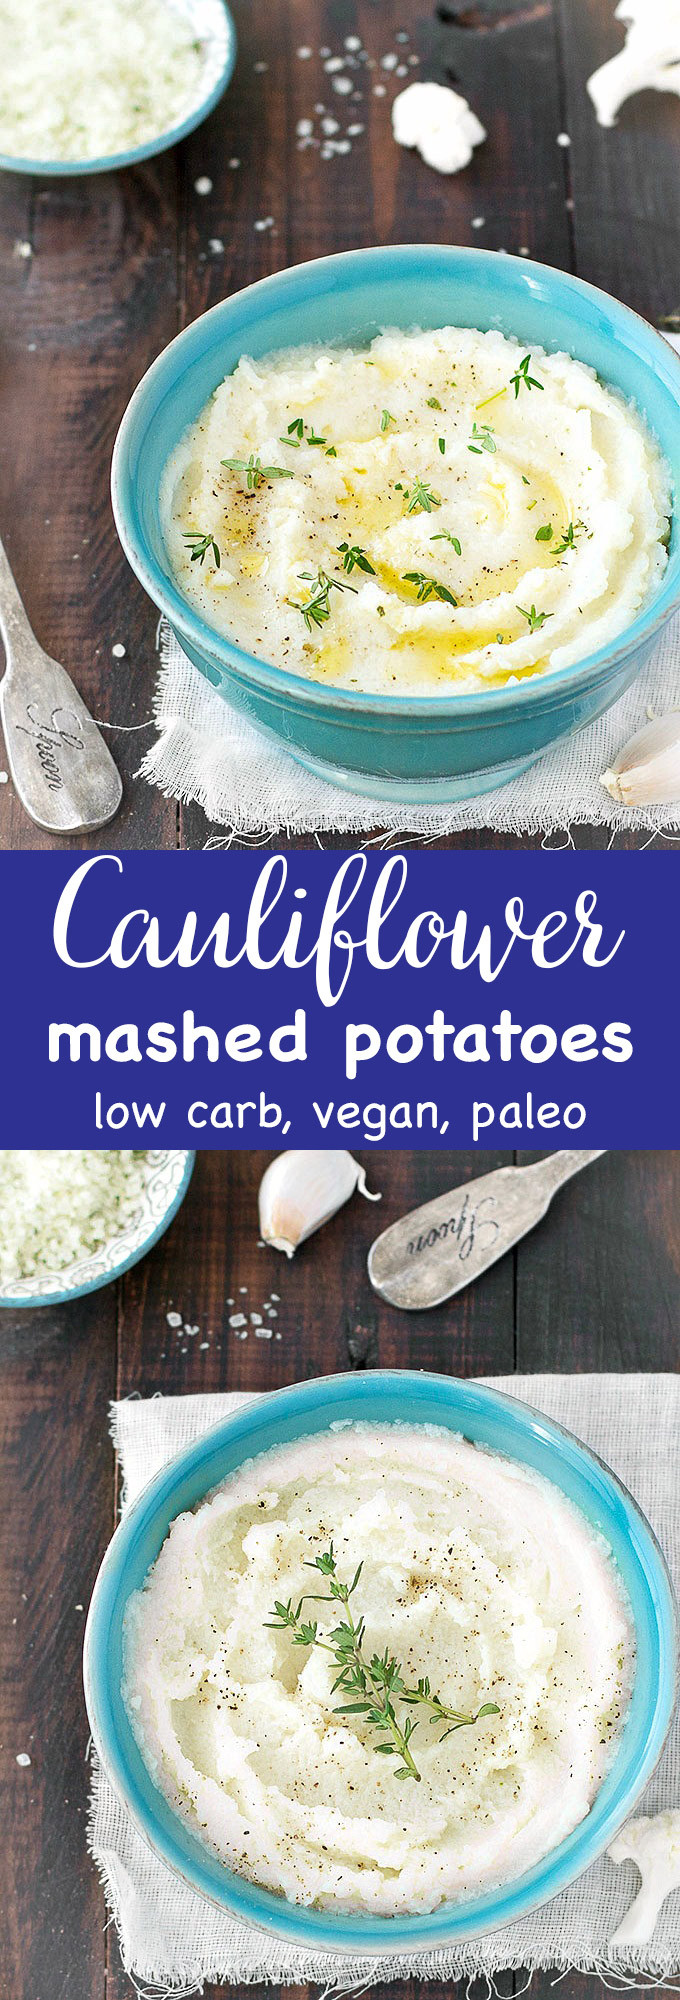 Recipe For Cauliflower Mashed Potatoes Healthy
 Healthy Cauliflower Mashed Potatoes As Easy As Apple Pie